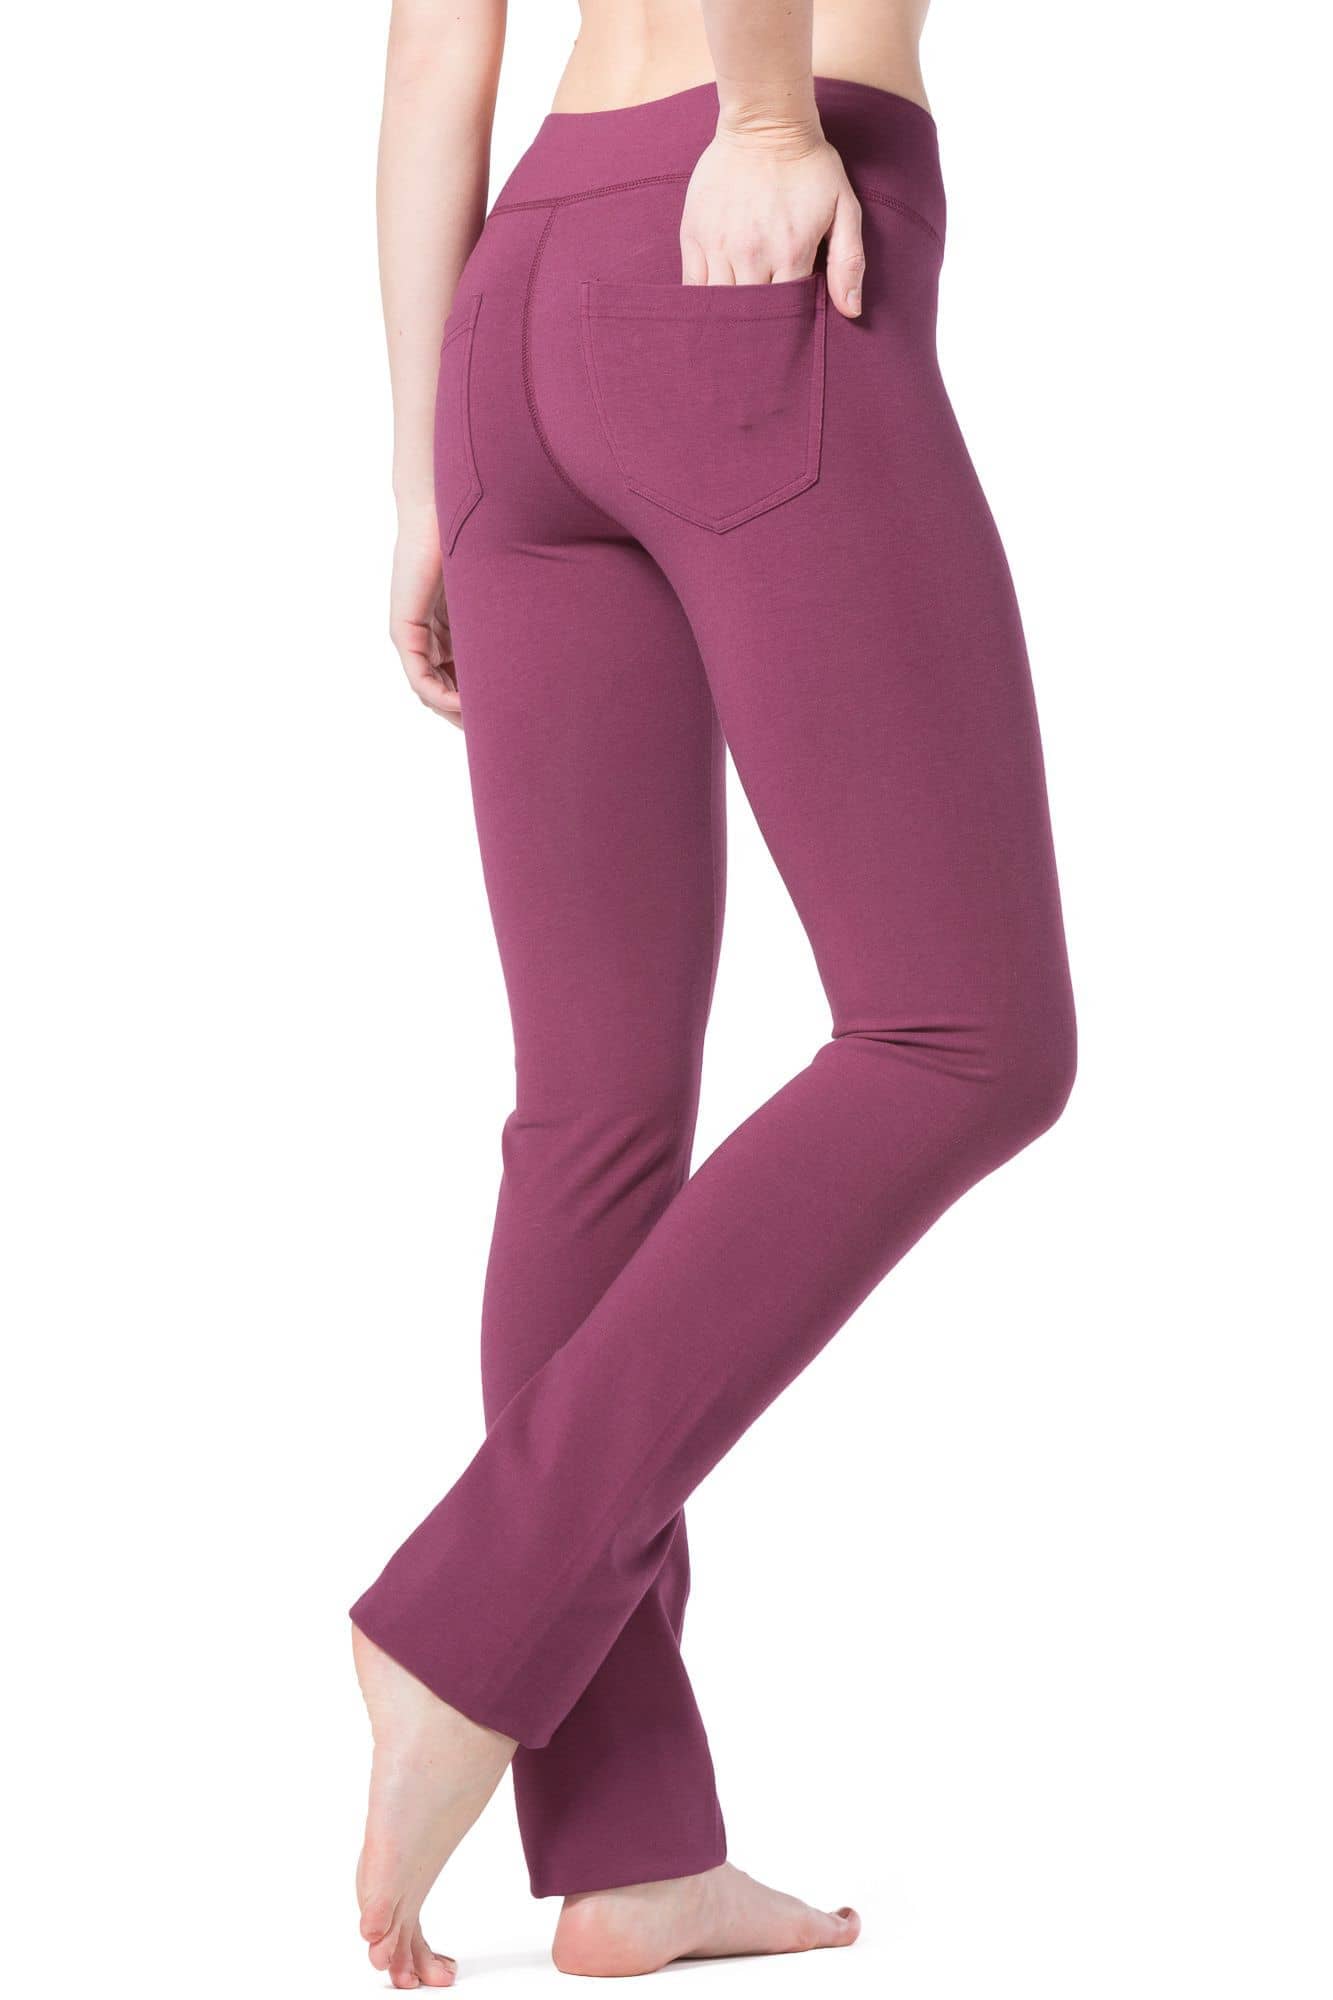 Women's Athletic Works Yoga Capris W/Cell Pockets Pink/Burgundy